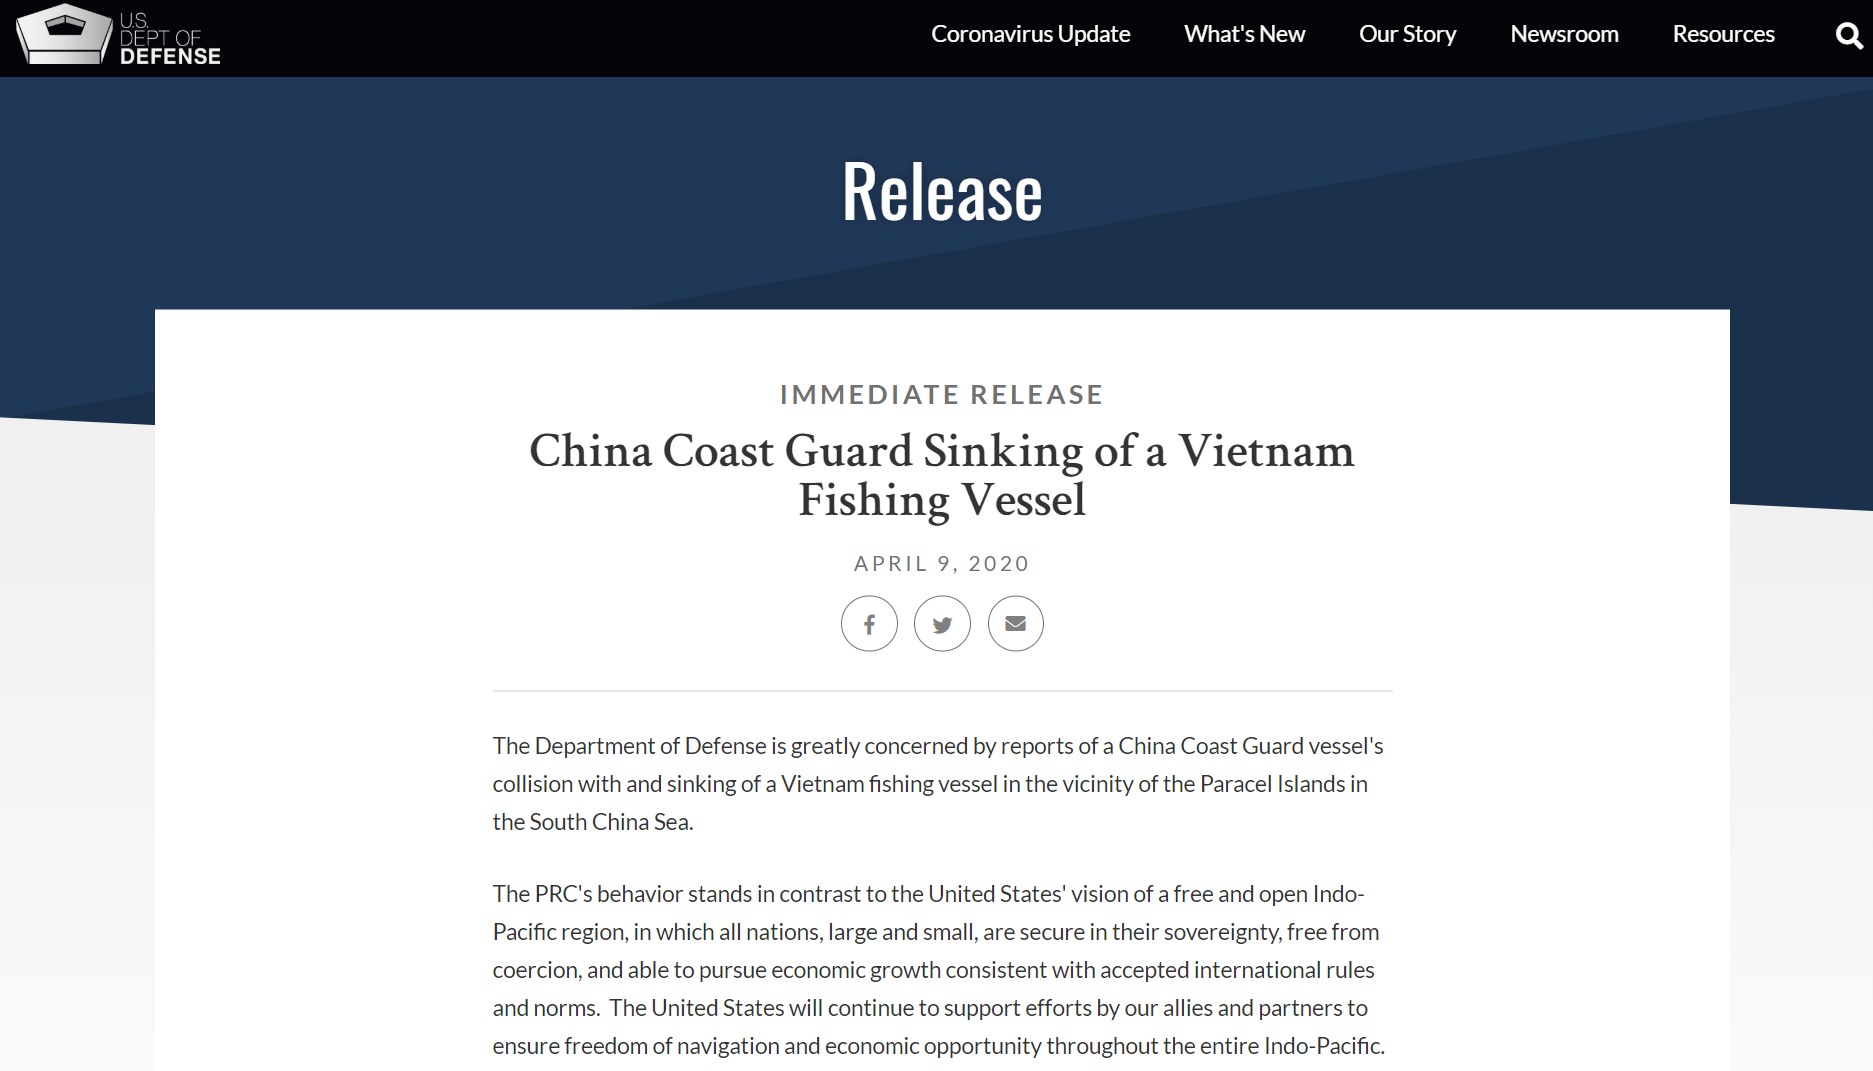 US Defense Department ‘greatly concerned’ by China’s sinking of Vietnamese fishing boat